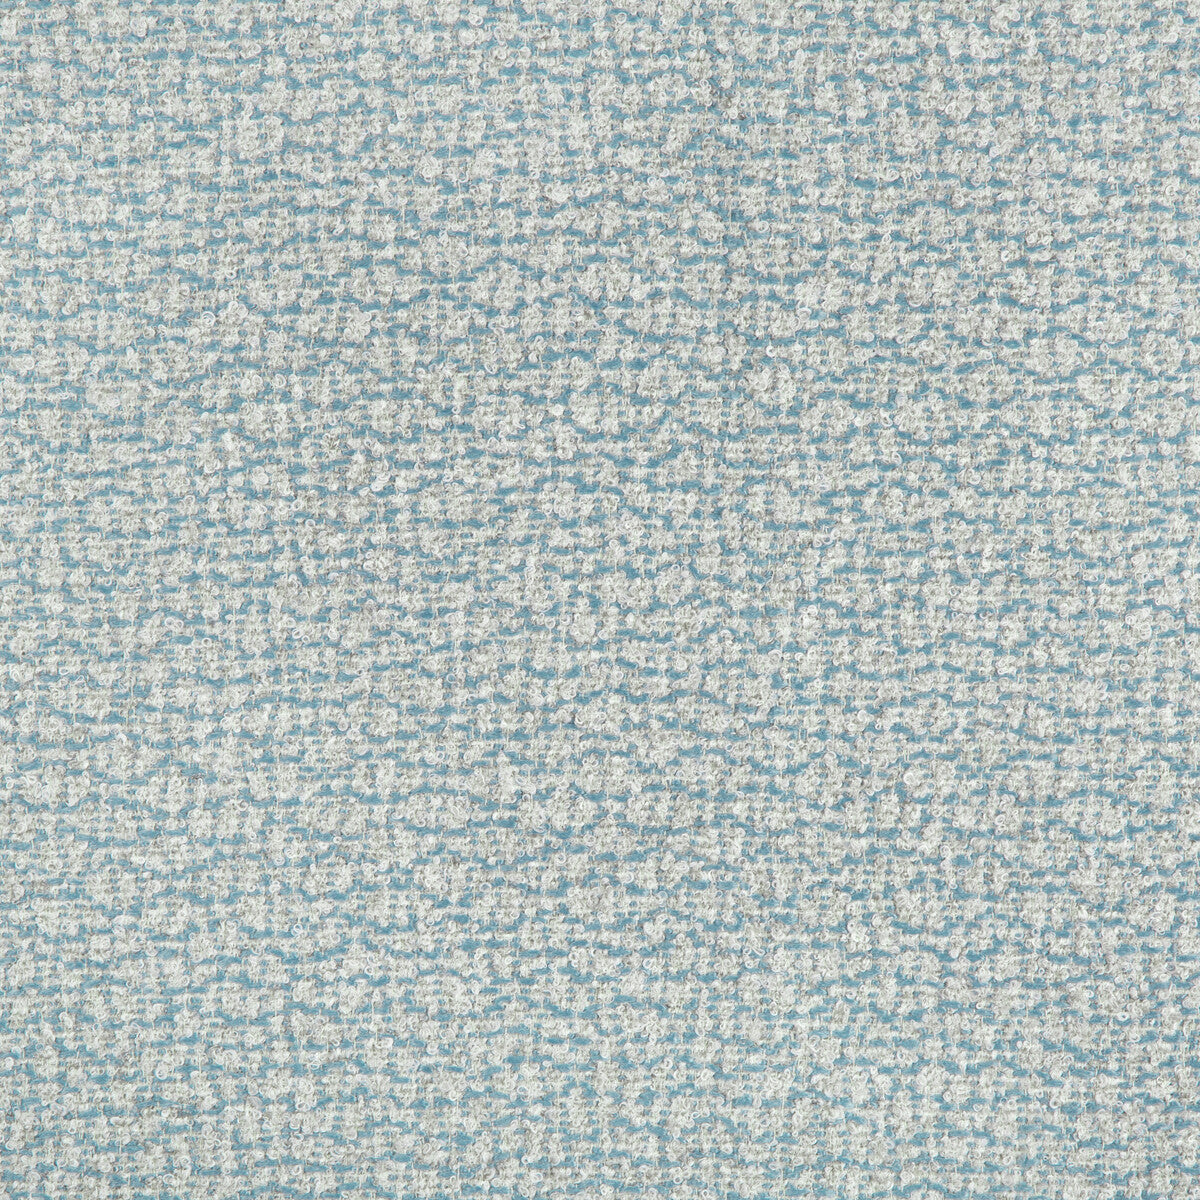 Rios fabric in glacial color - pattern GWF-3782.15.0 - by Lee Jofa Modern in the Kelly Wearstler Oculum Indoor/Outdoor collection